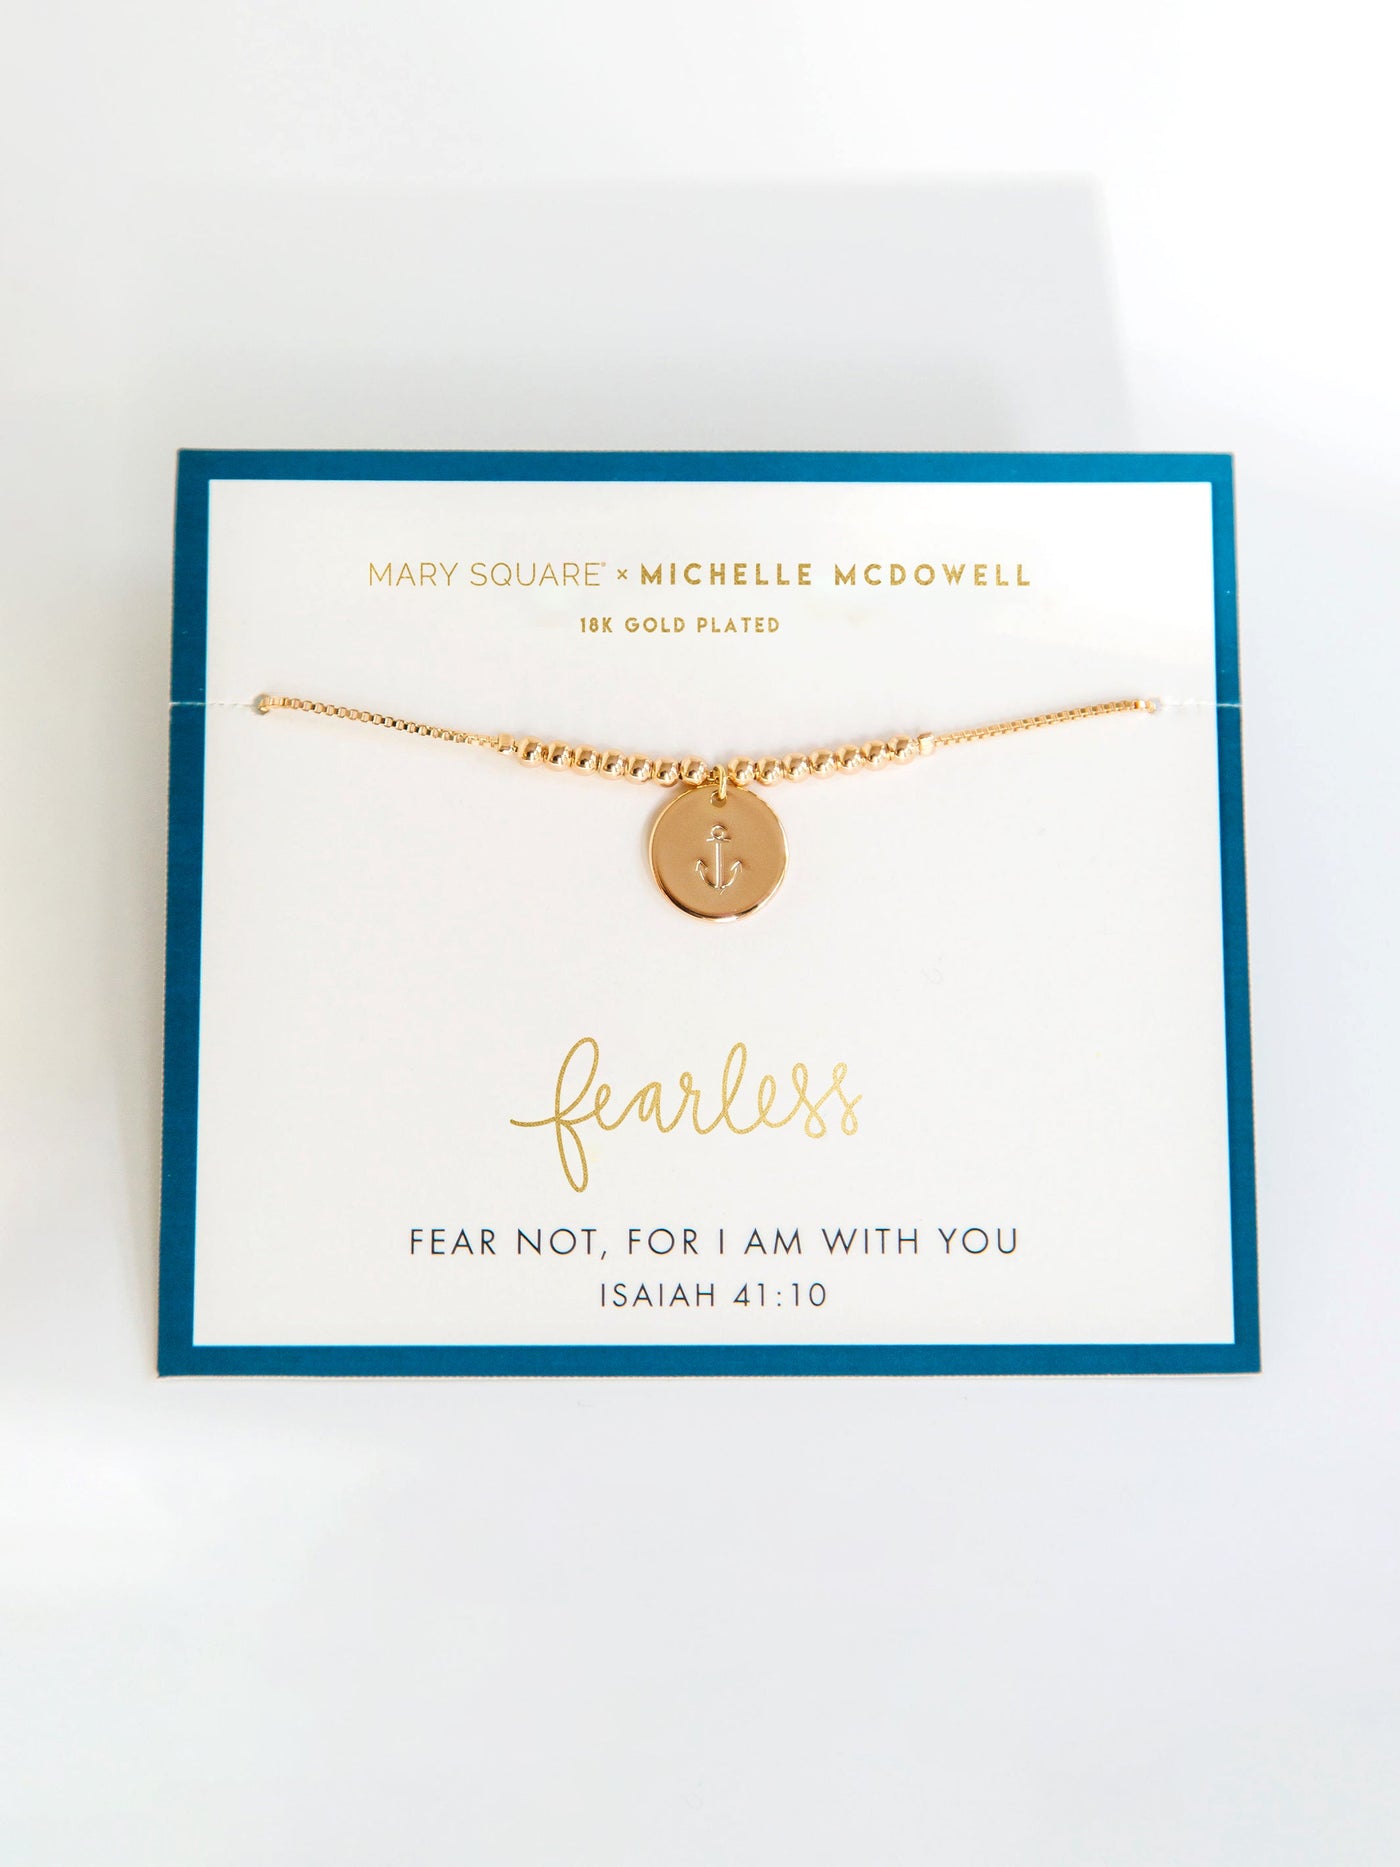 Fearless Inspirational Bracelet - Mary Square, LLC